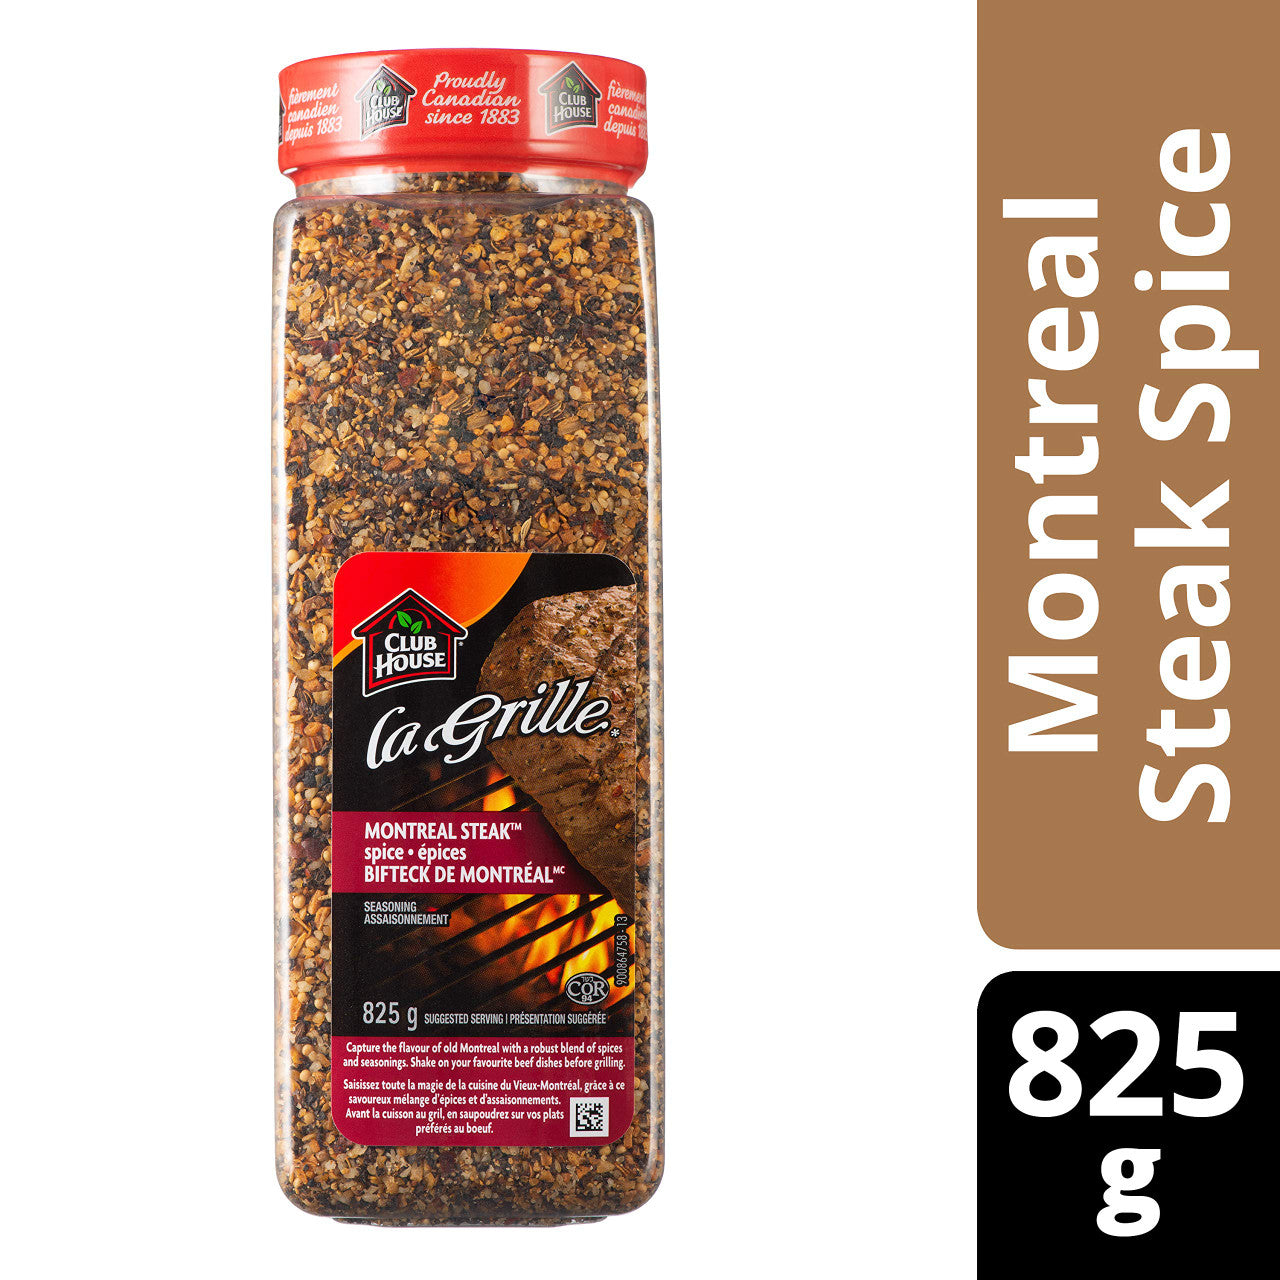 Club House La Grille Montreal Steak Spice, 825g/29.1oz. {Imported from Canada}